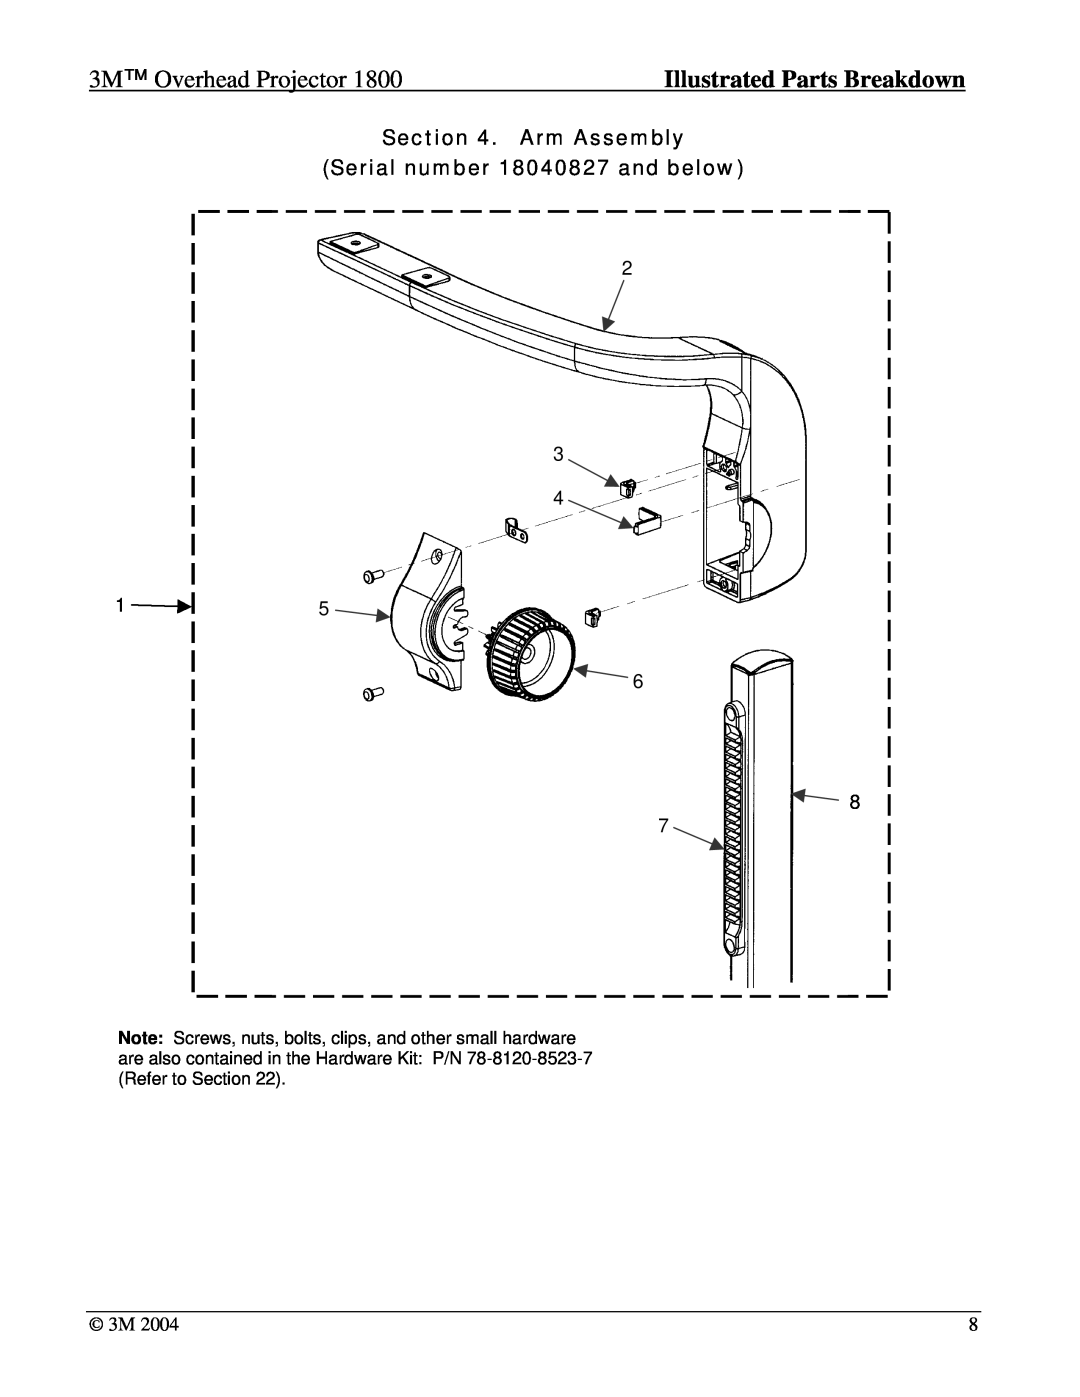 3M 1800 manual Arm Assembly Serial number 18040827 and below, 3M Overhead Projector, Illustrated Parts Breakdown 